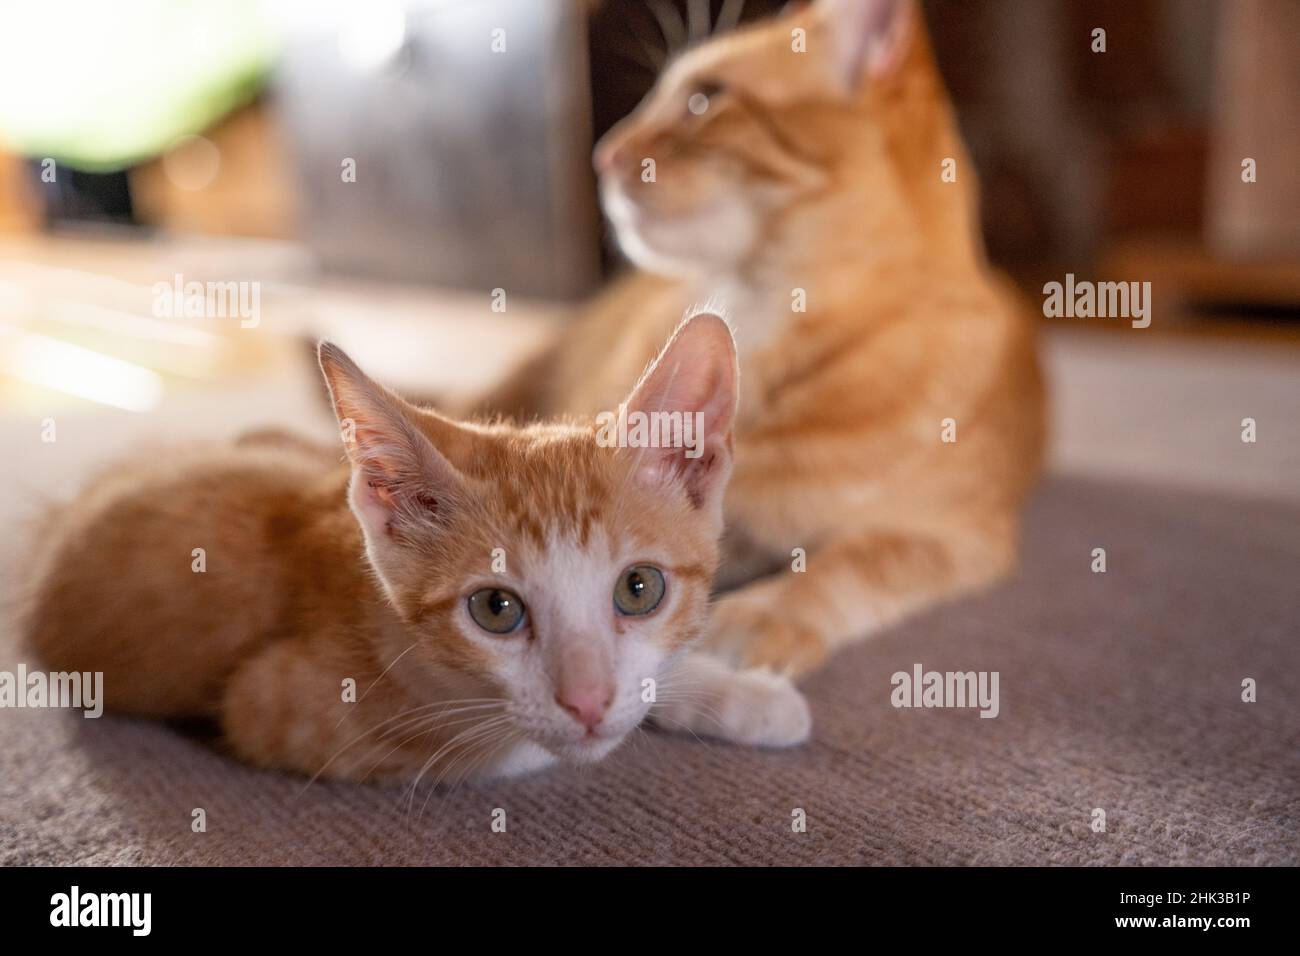 Closeup of the cute ginger cat with its kitten on the floor. Stock Photo